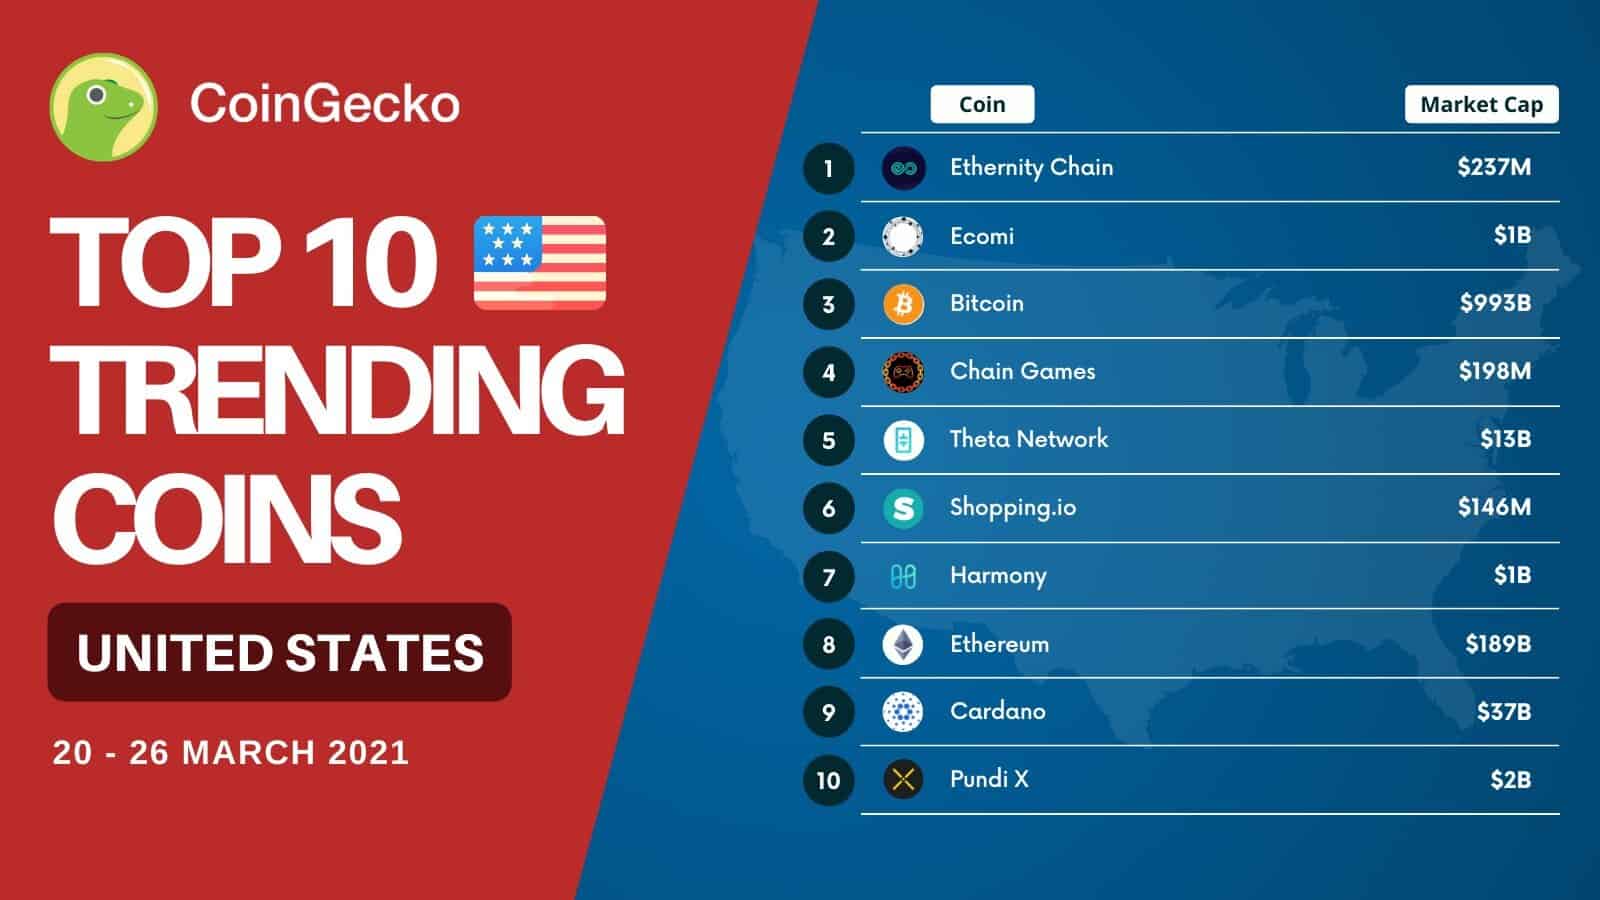 Top Trending Crypto Assets in the US. Source: CoinGecko